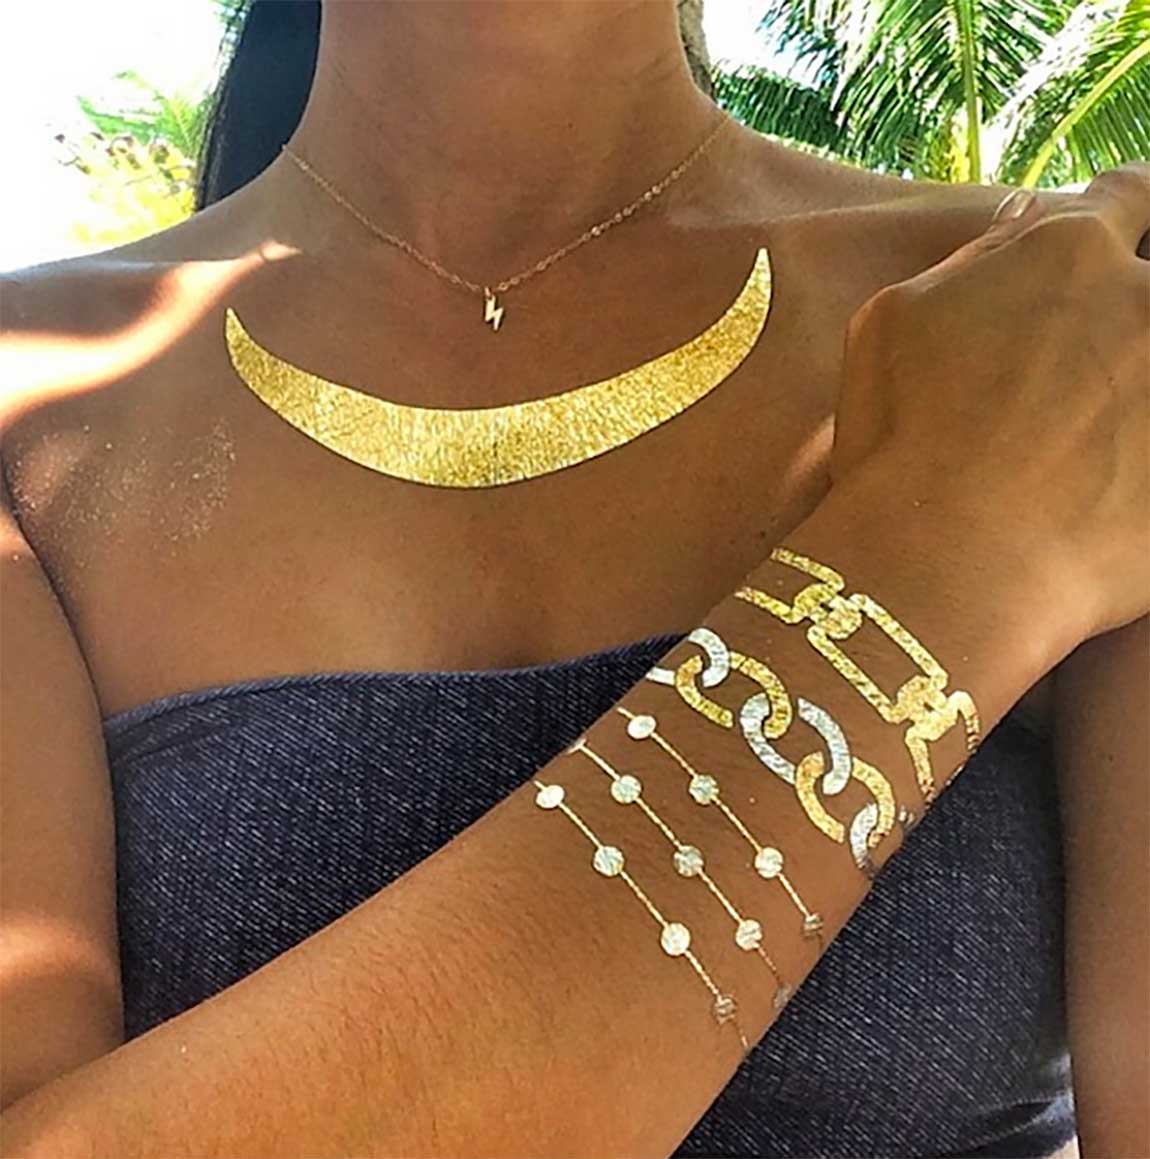 Flash Tattoo Necklace: This New Trend Combines Jewelry And Tattoos